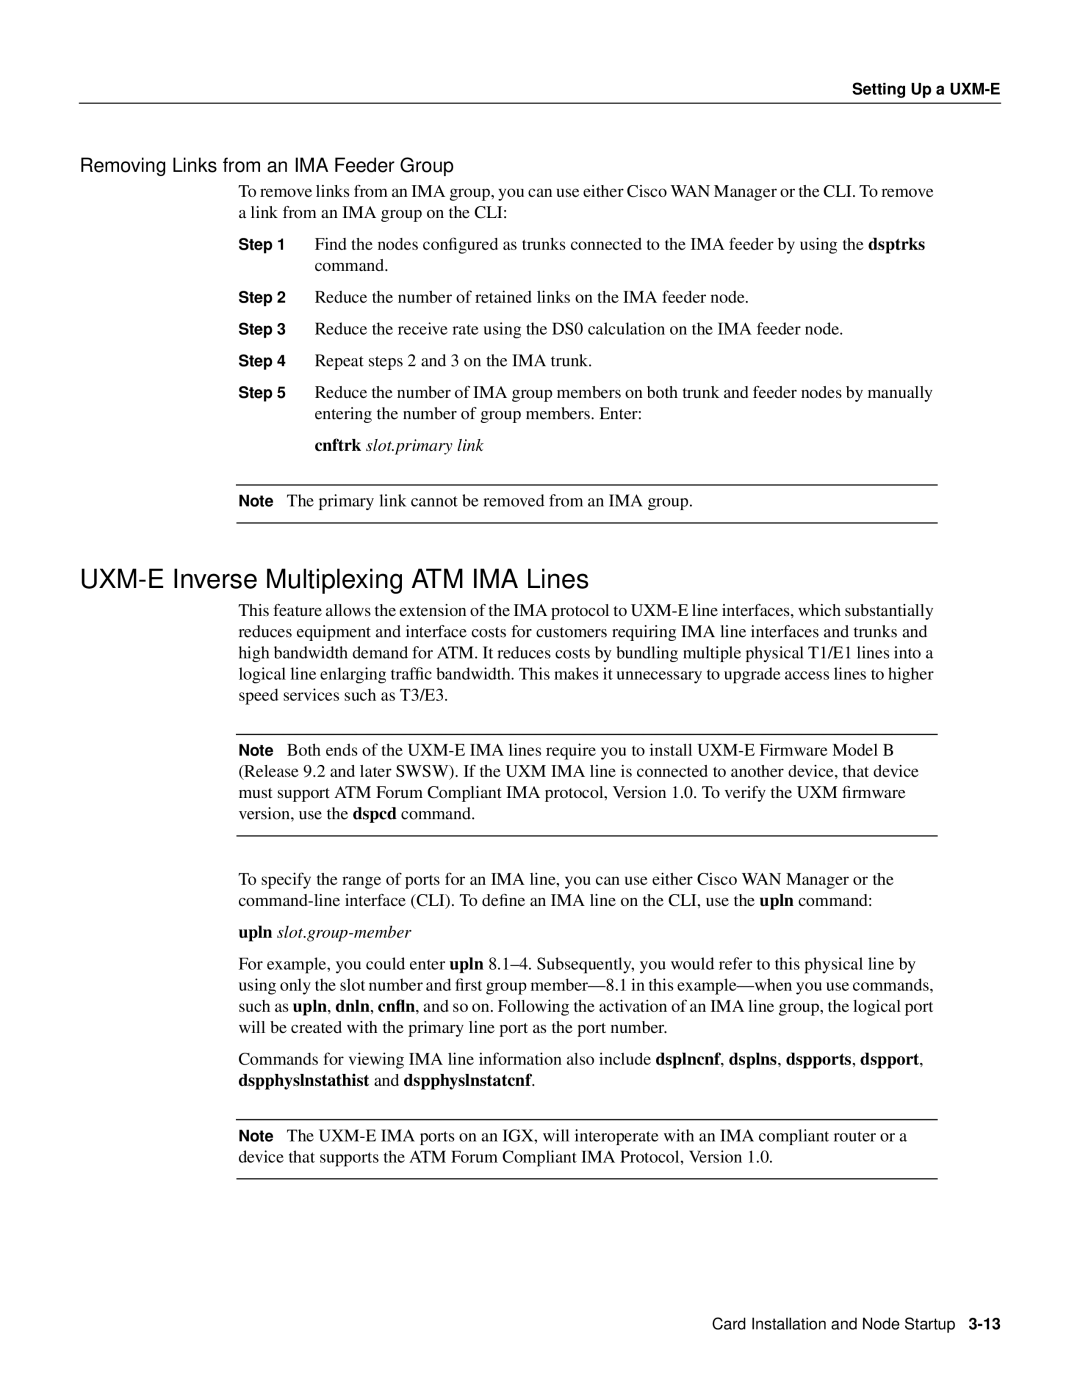 Cisco Systems IGX 8400 Series manual UXM-E Inverse Multiplexing ATM IMA Lines, Removing Links from an IMA Feeder Group 